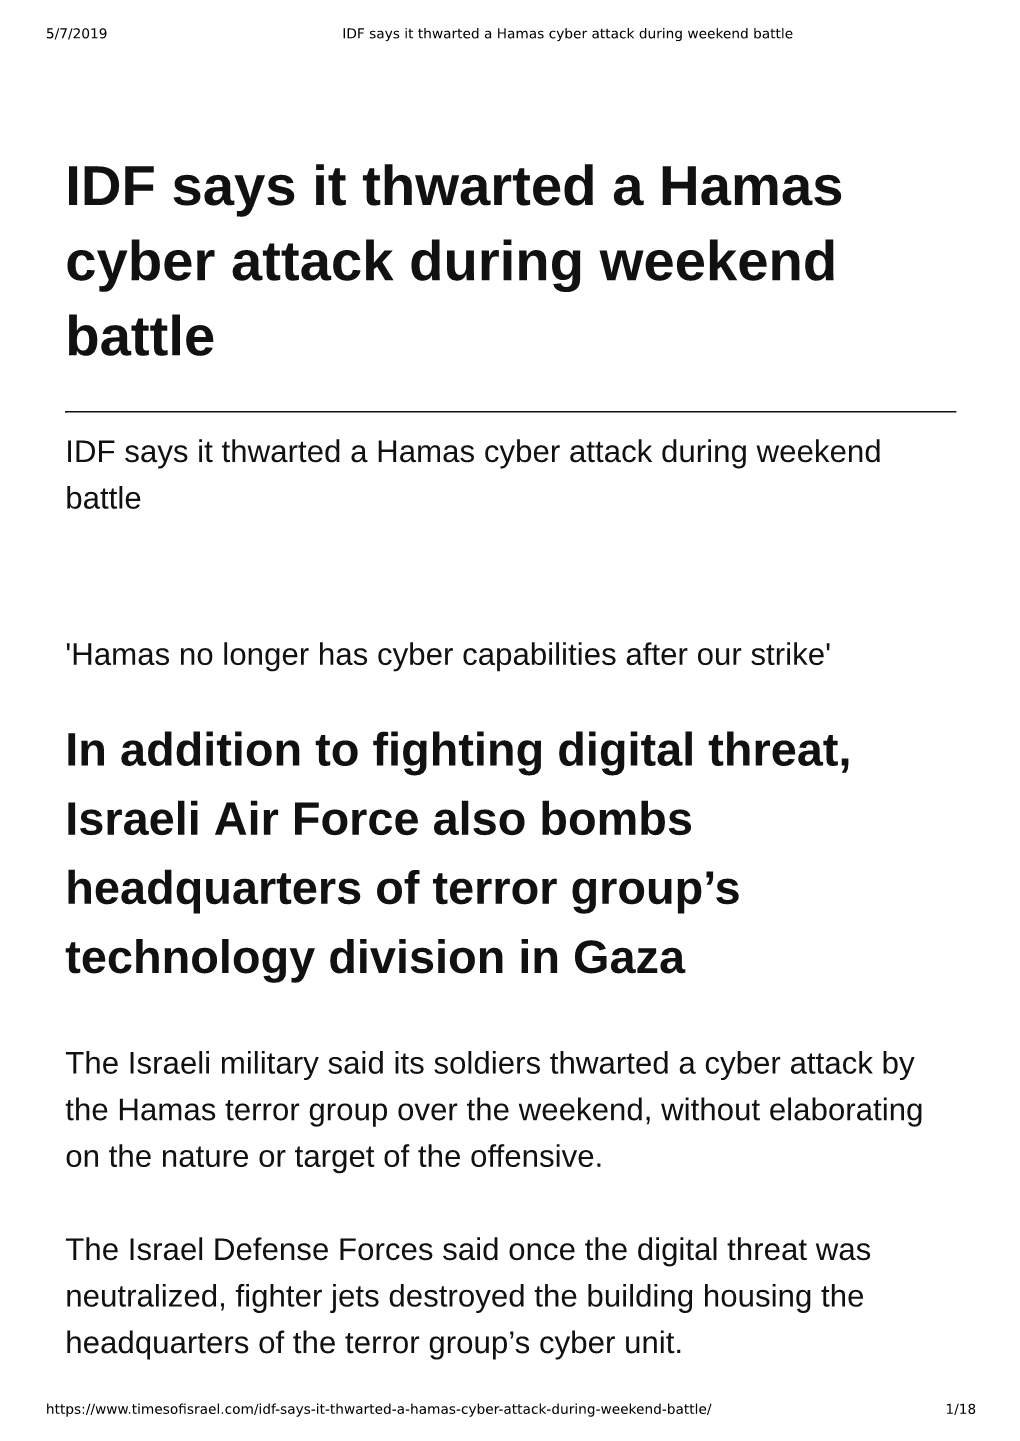 IDF Says It Thwarted a Hamas Cyber Attack During Weekend Battle